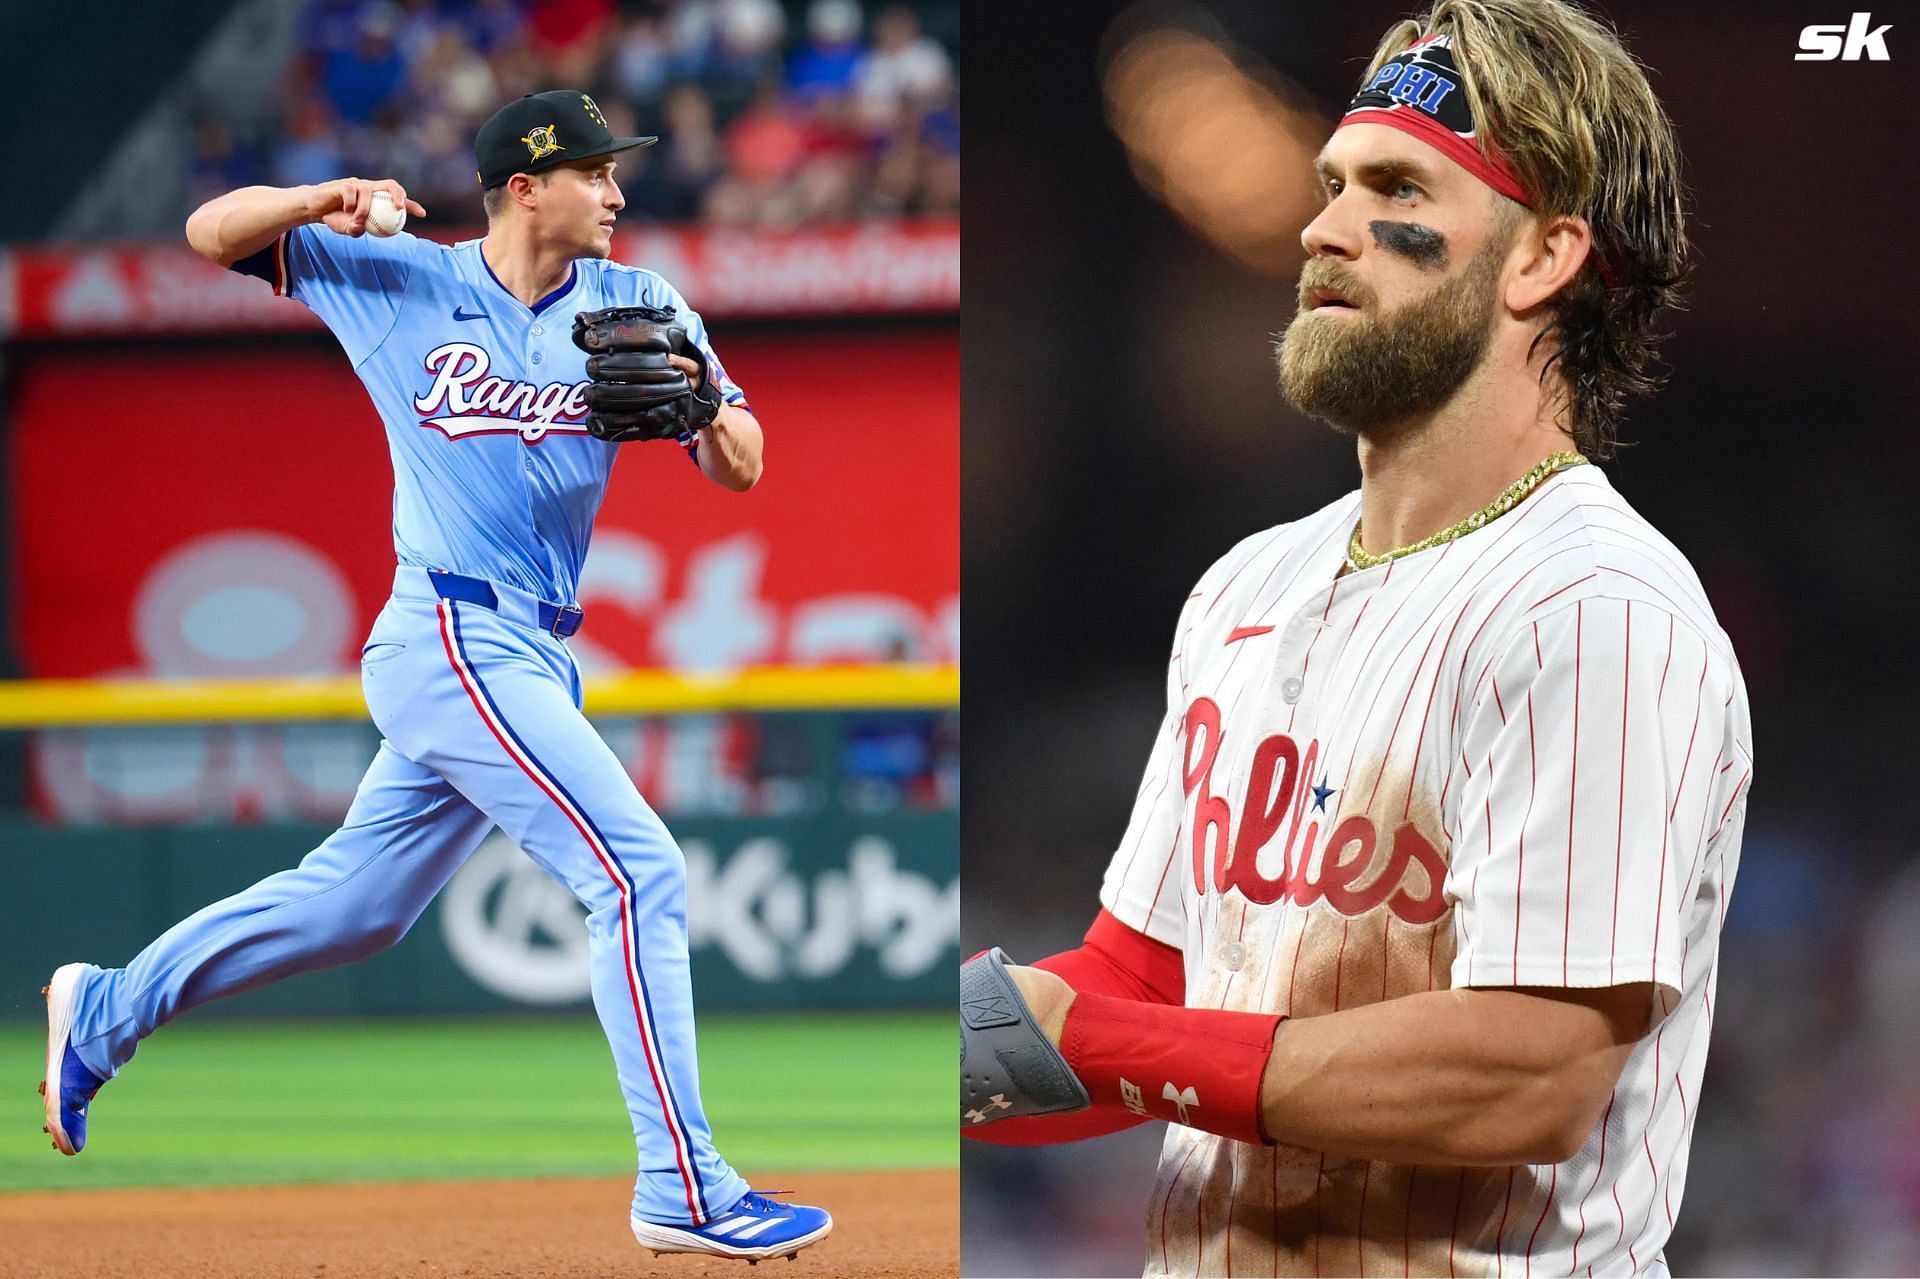 Phillies vs Rangers Preview &amp; Prediction: Records, Pitching Matchups, head to head and more